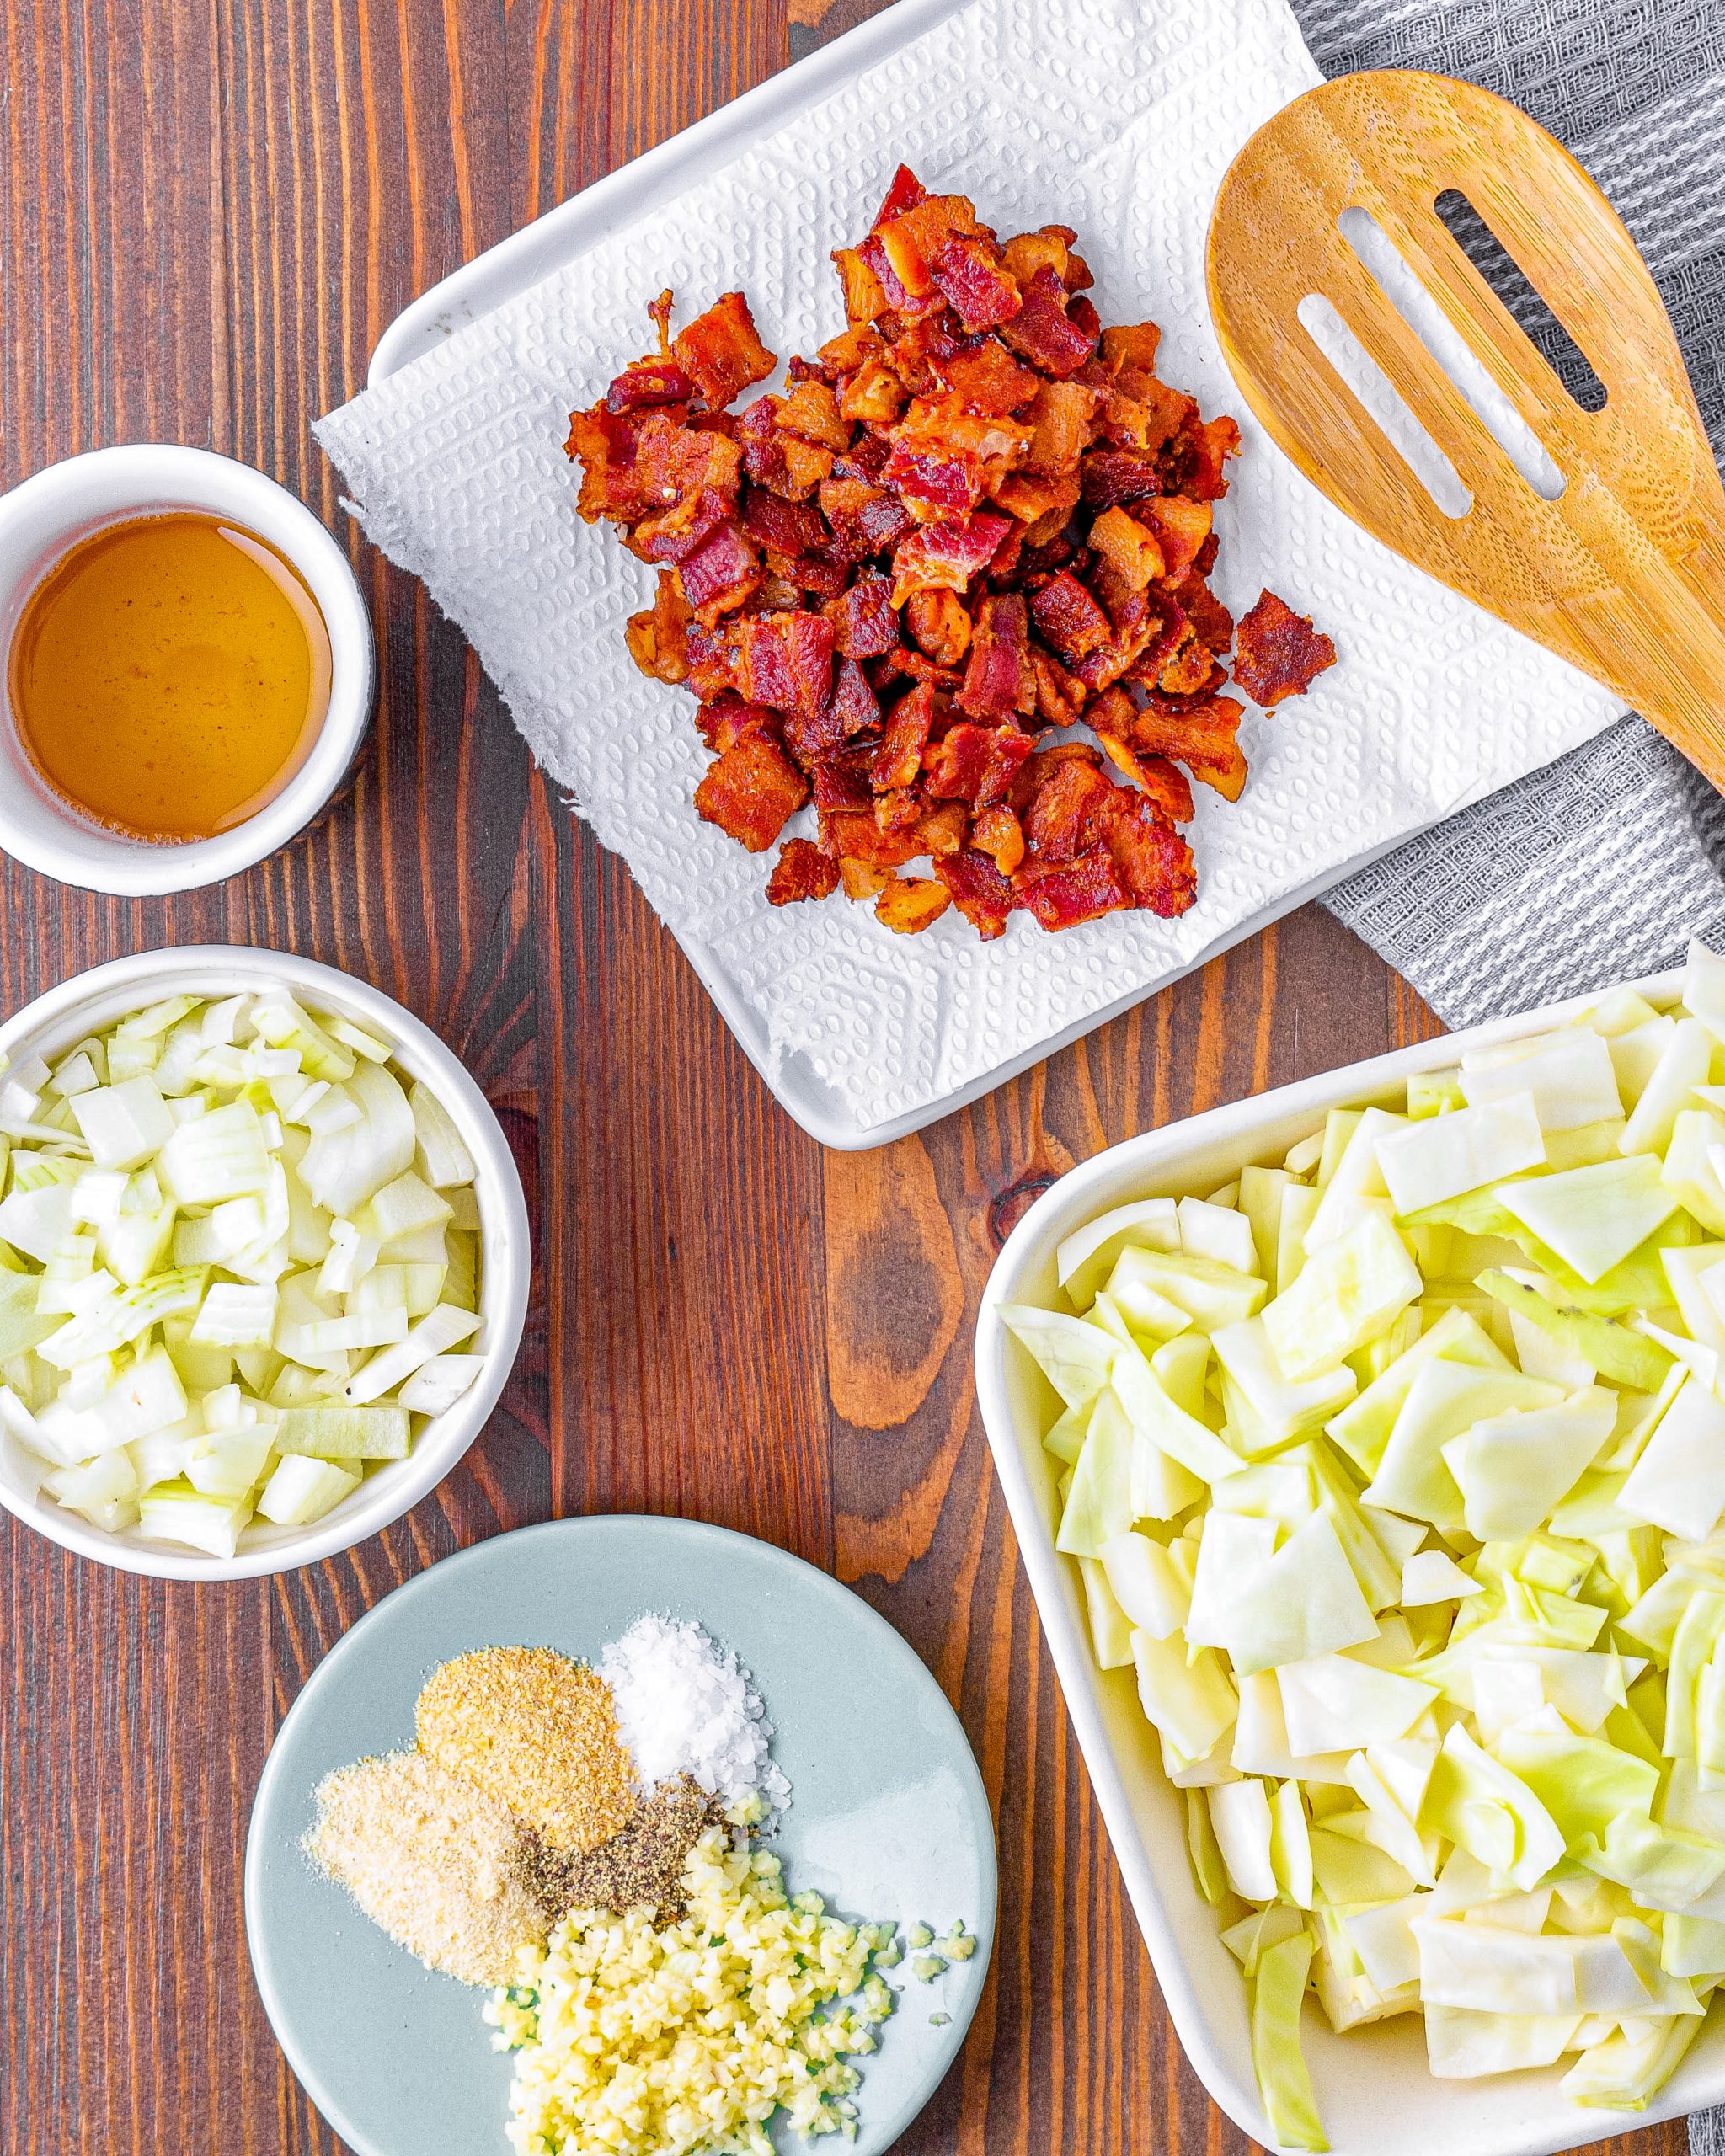 Fried Cabbage with Onions and Bacon Ingredients